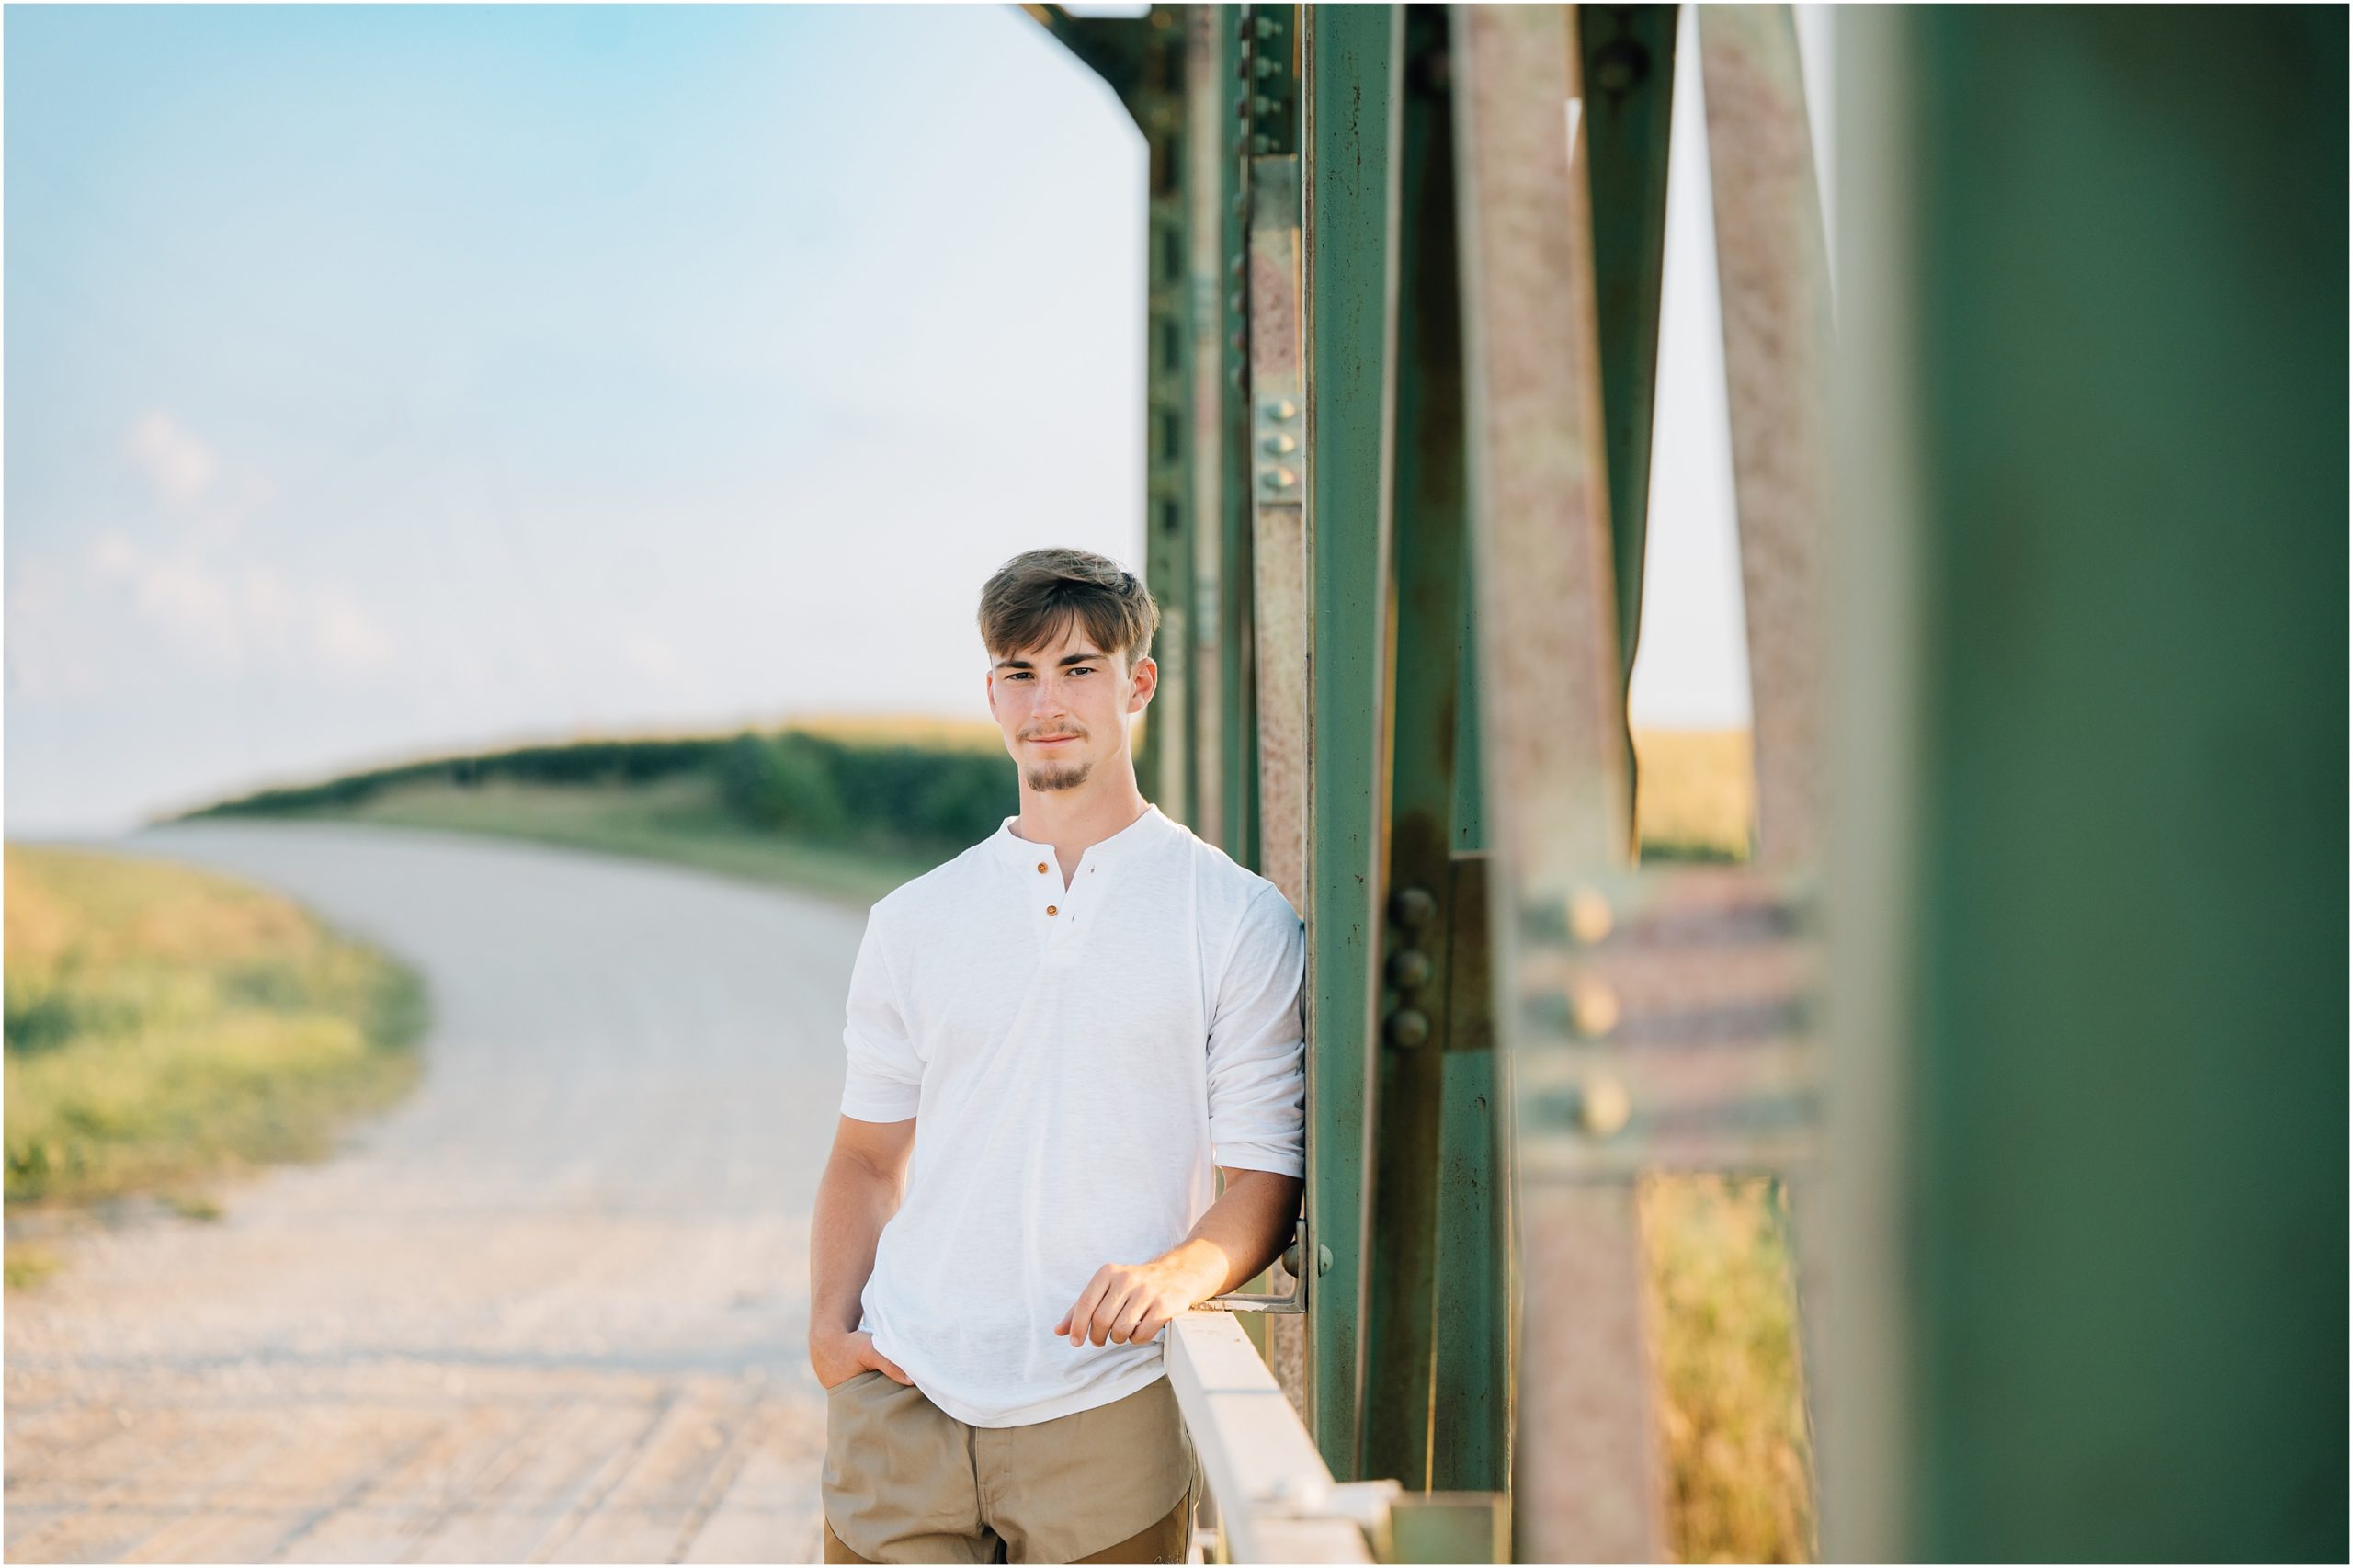 Senior Guy on bridge senior picture. Photo by Anna Brace who specializes in Harlan Iowa photography.